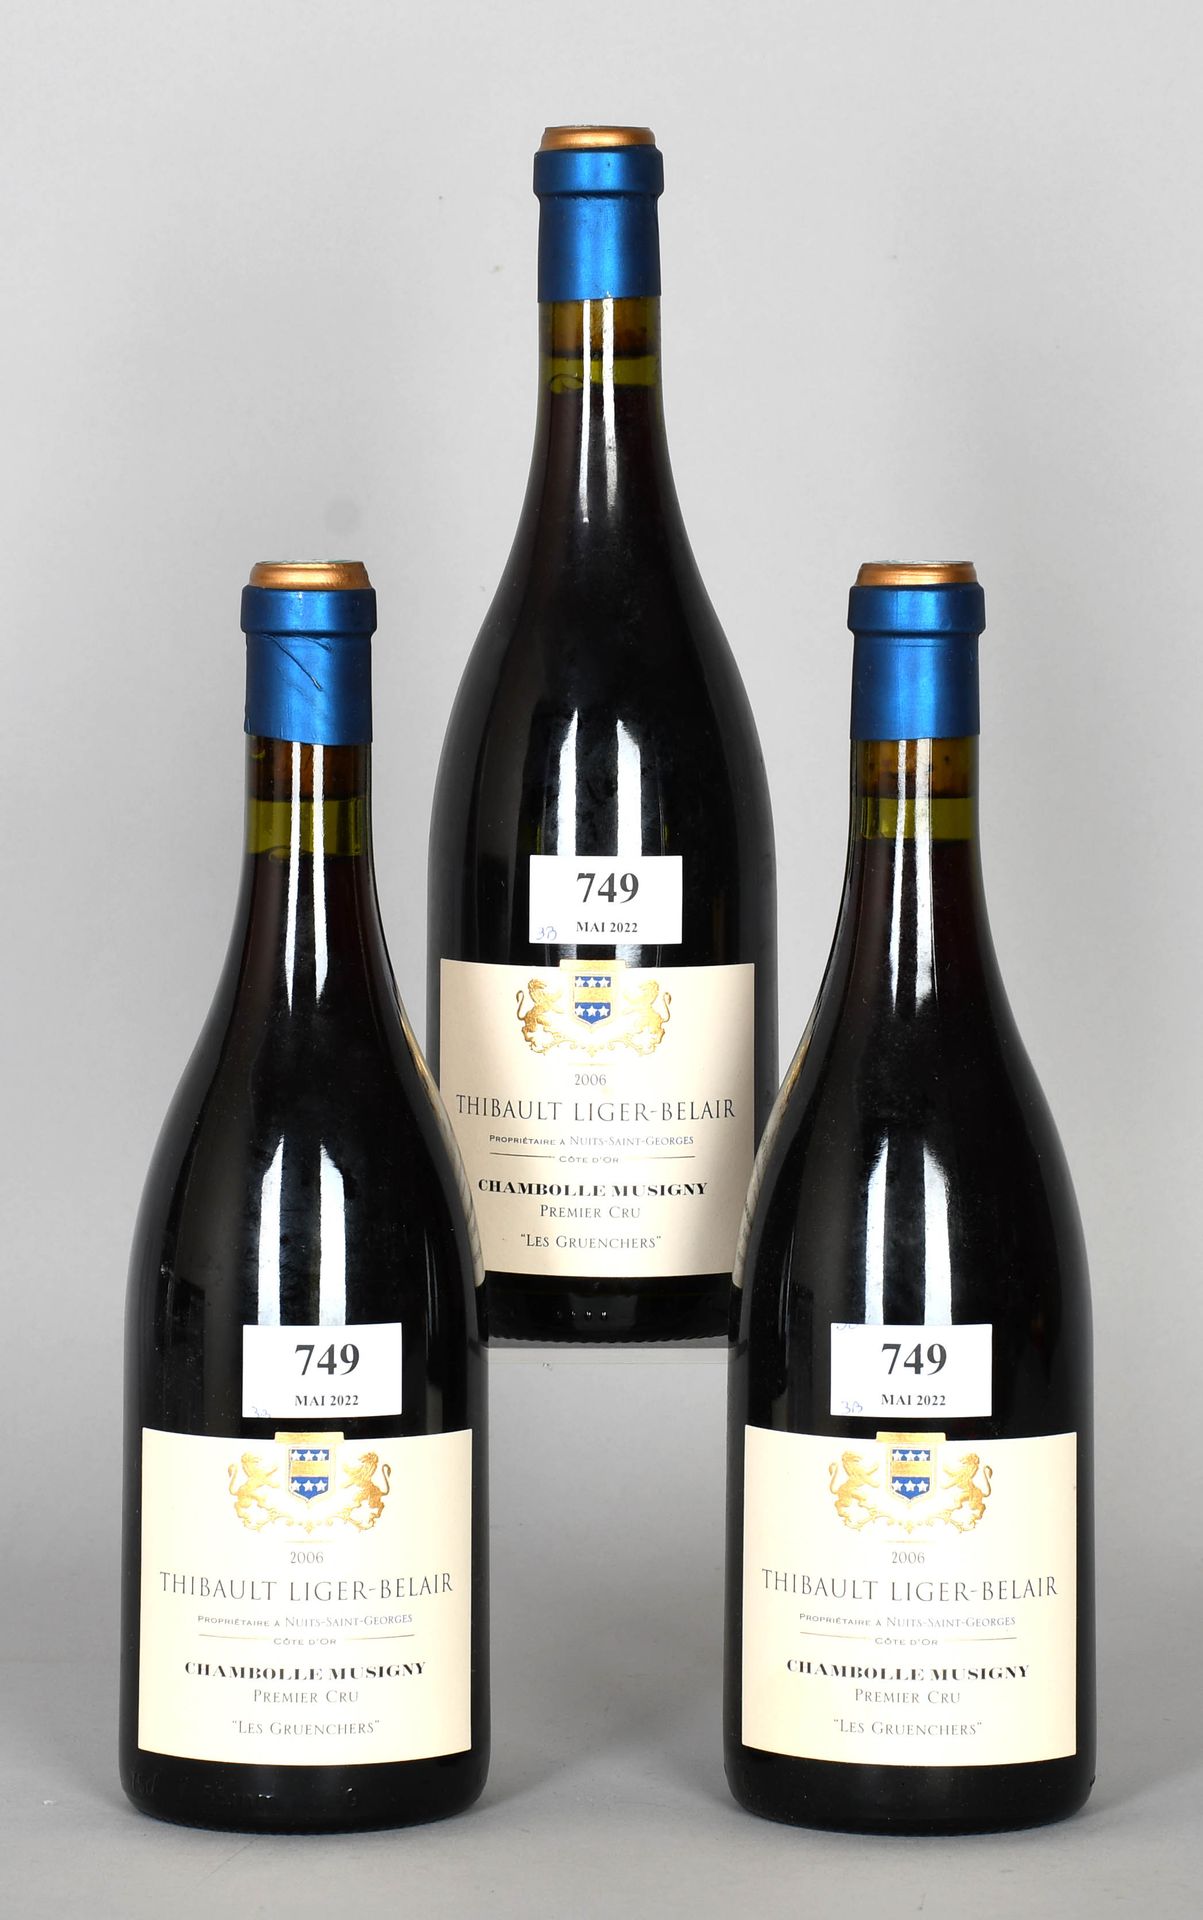 Null Chambolle-Musigny 2006 - Mise domaine - Tres botellas de vino

"Les Gruench&hellip;